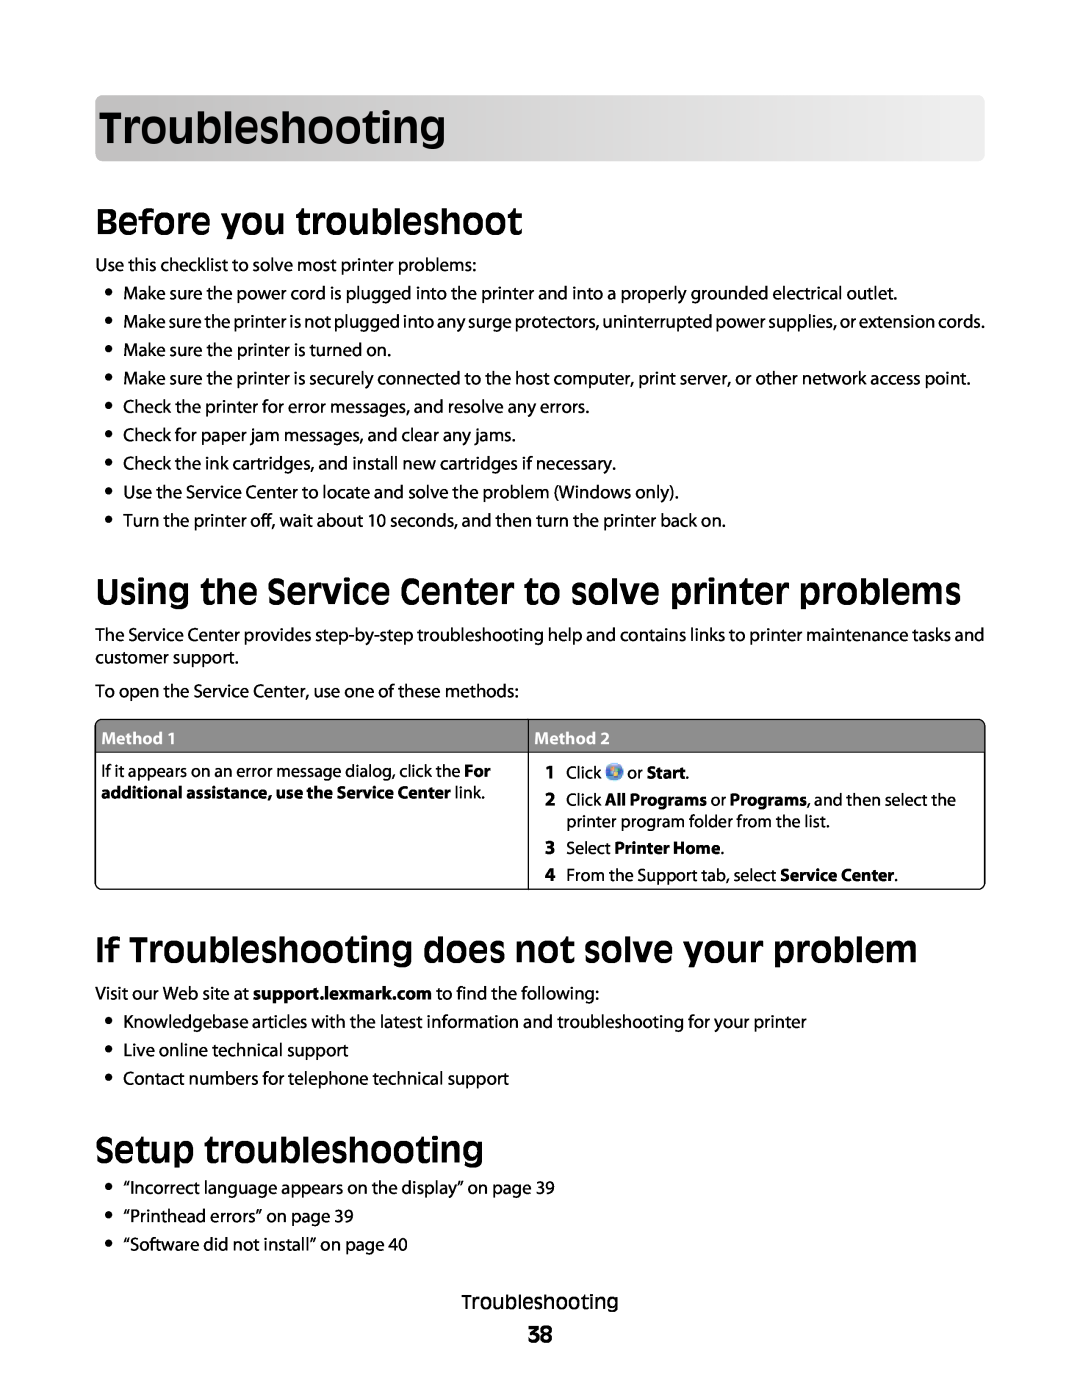 Lexmark Pro803, Pro800 manual Troubleshooting, Before you troubleshoot, Using the Service Center to solve printer problems 